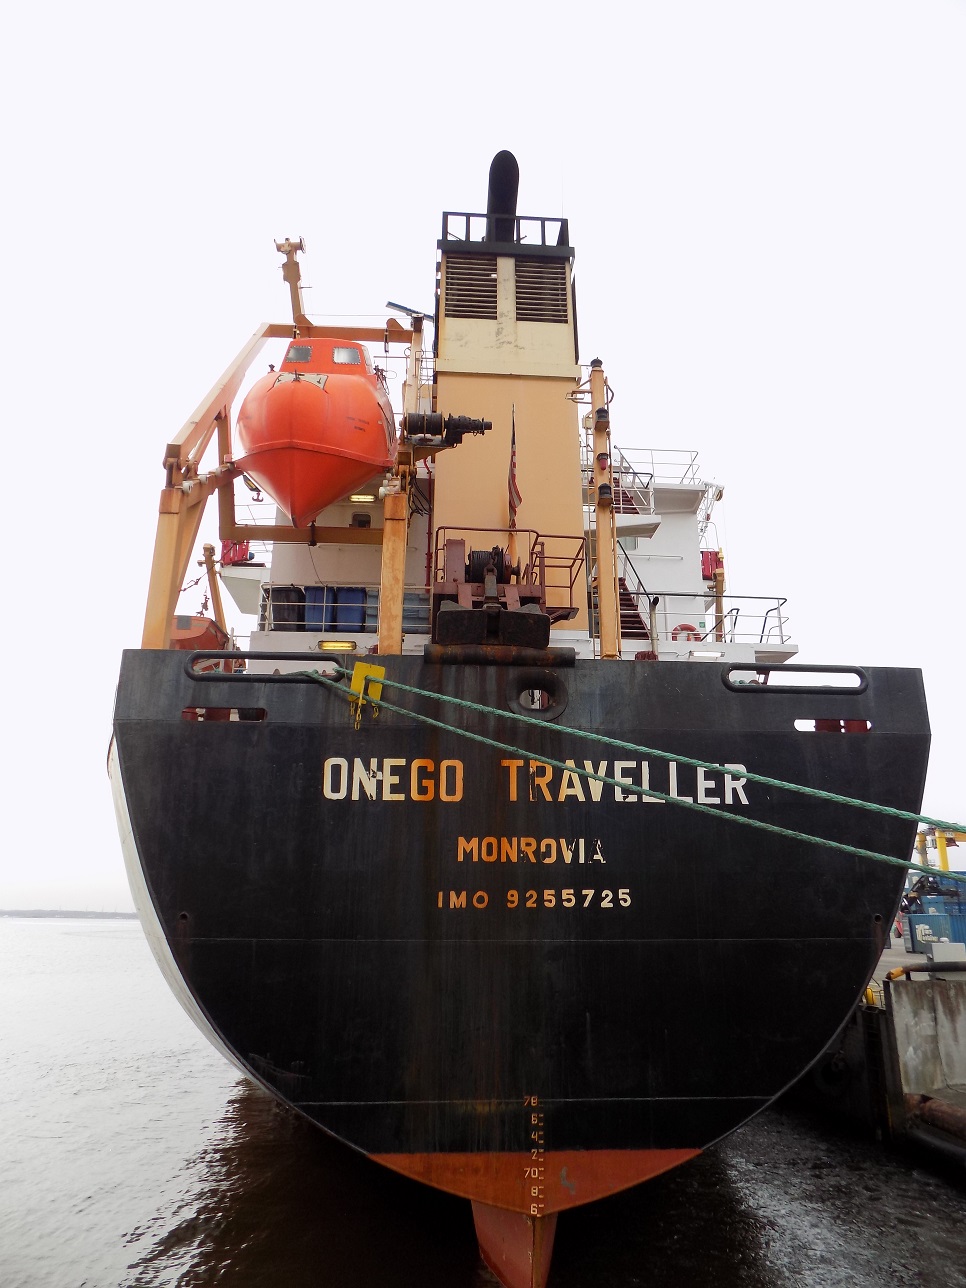 Onego Traveller